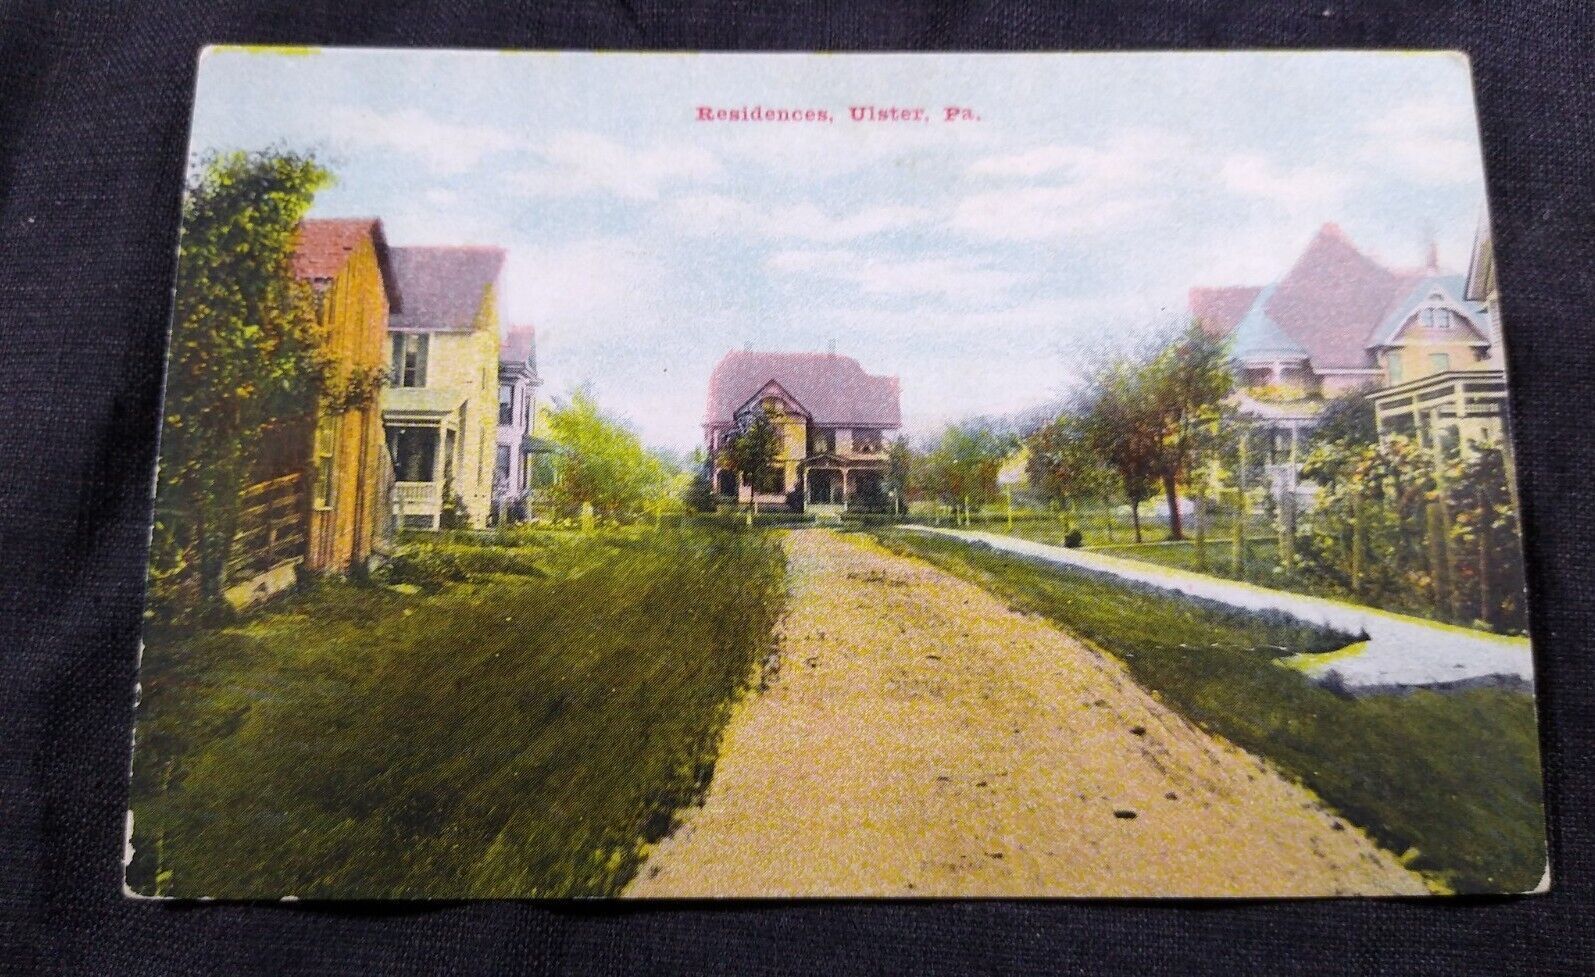 Ulster PA  Postcard Residences Circa 1908 Published By J. R. Eiffert Of Ulster